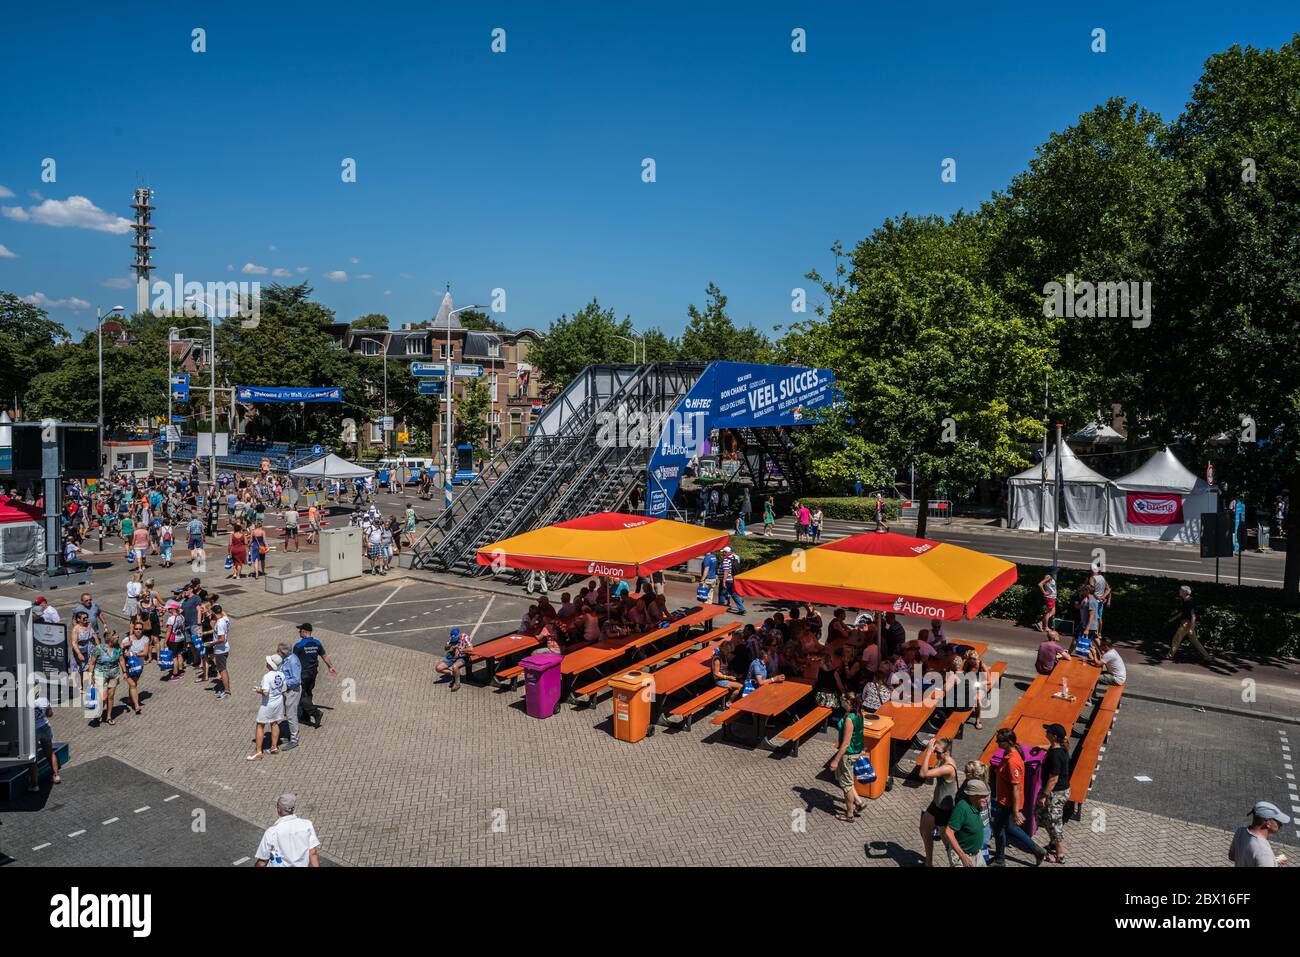 Nijmegen, The Netherlands 16th July 2018 - Wedren at the Four Days March Stock Photo